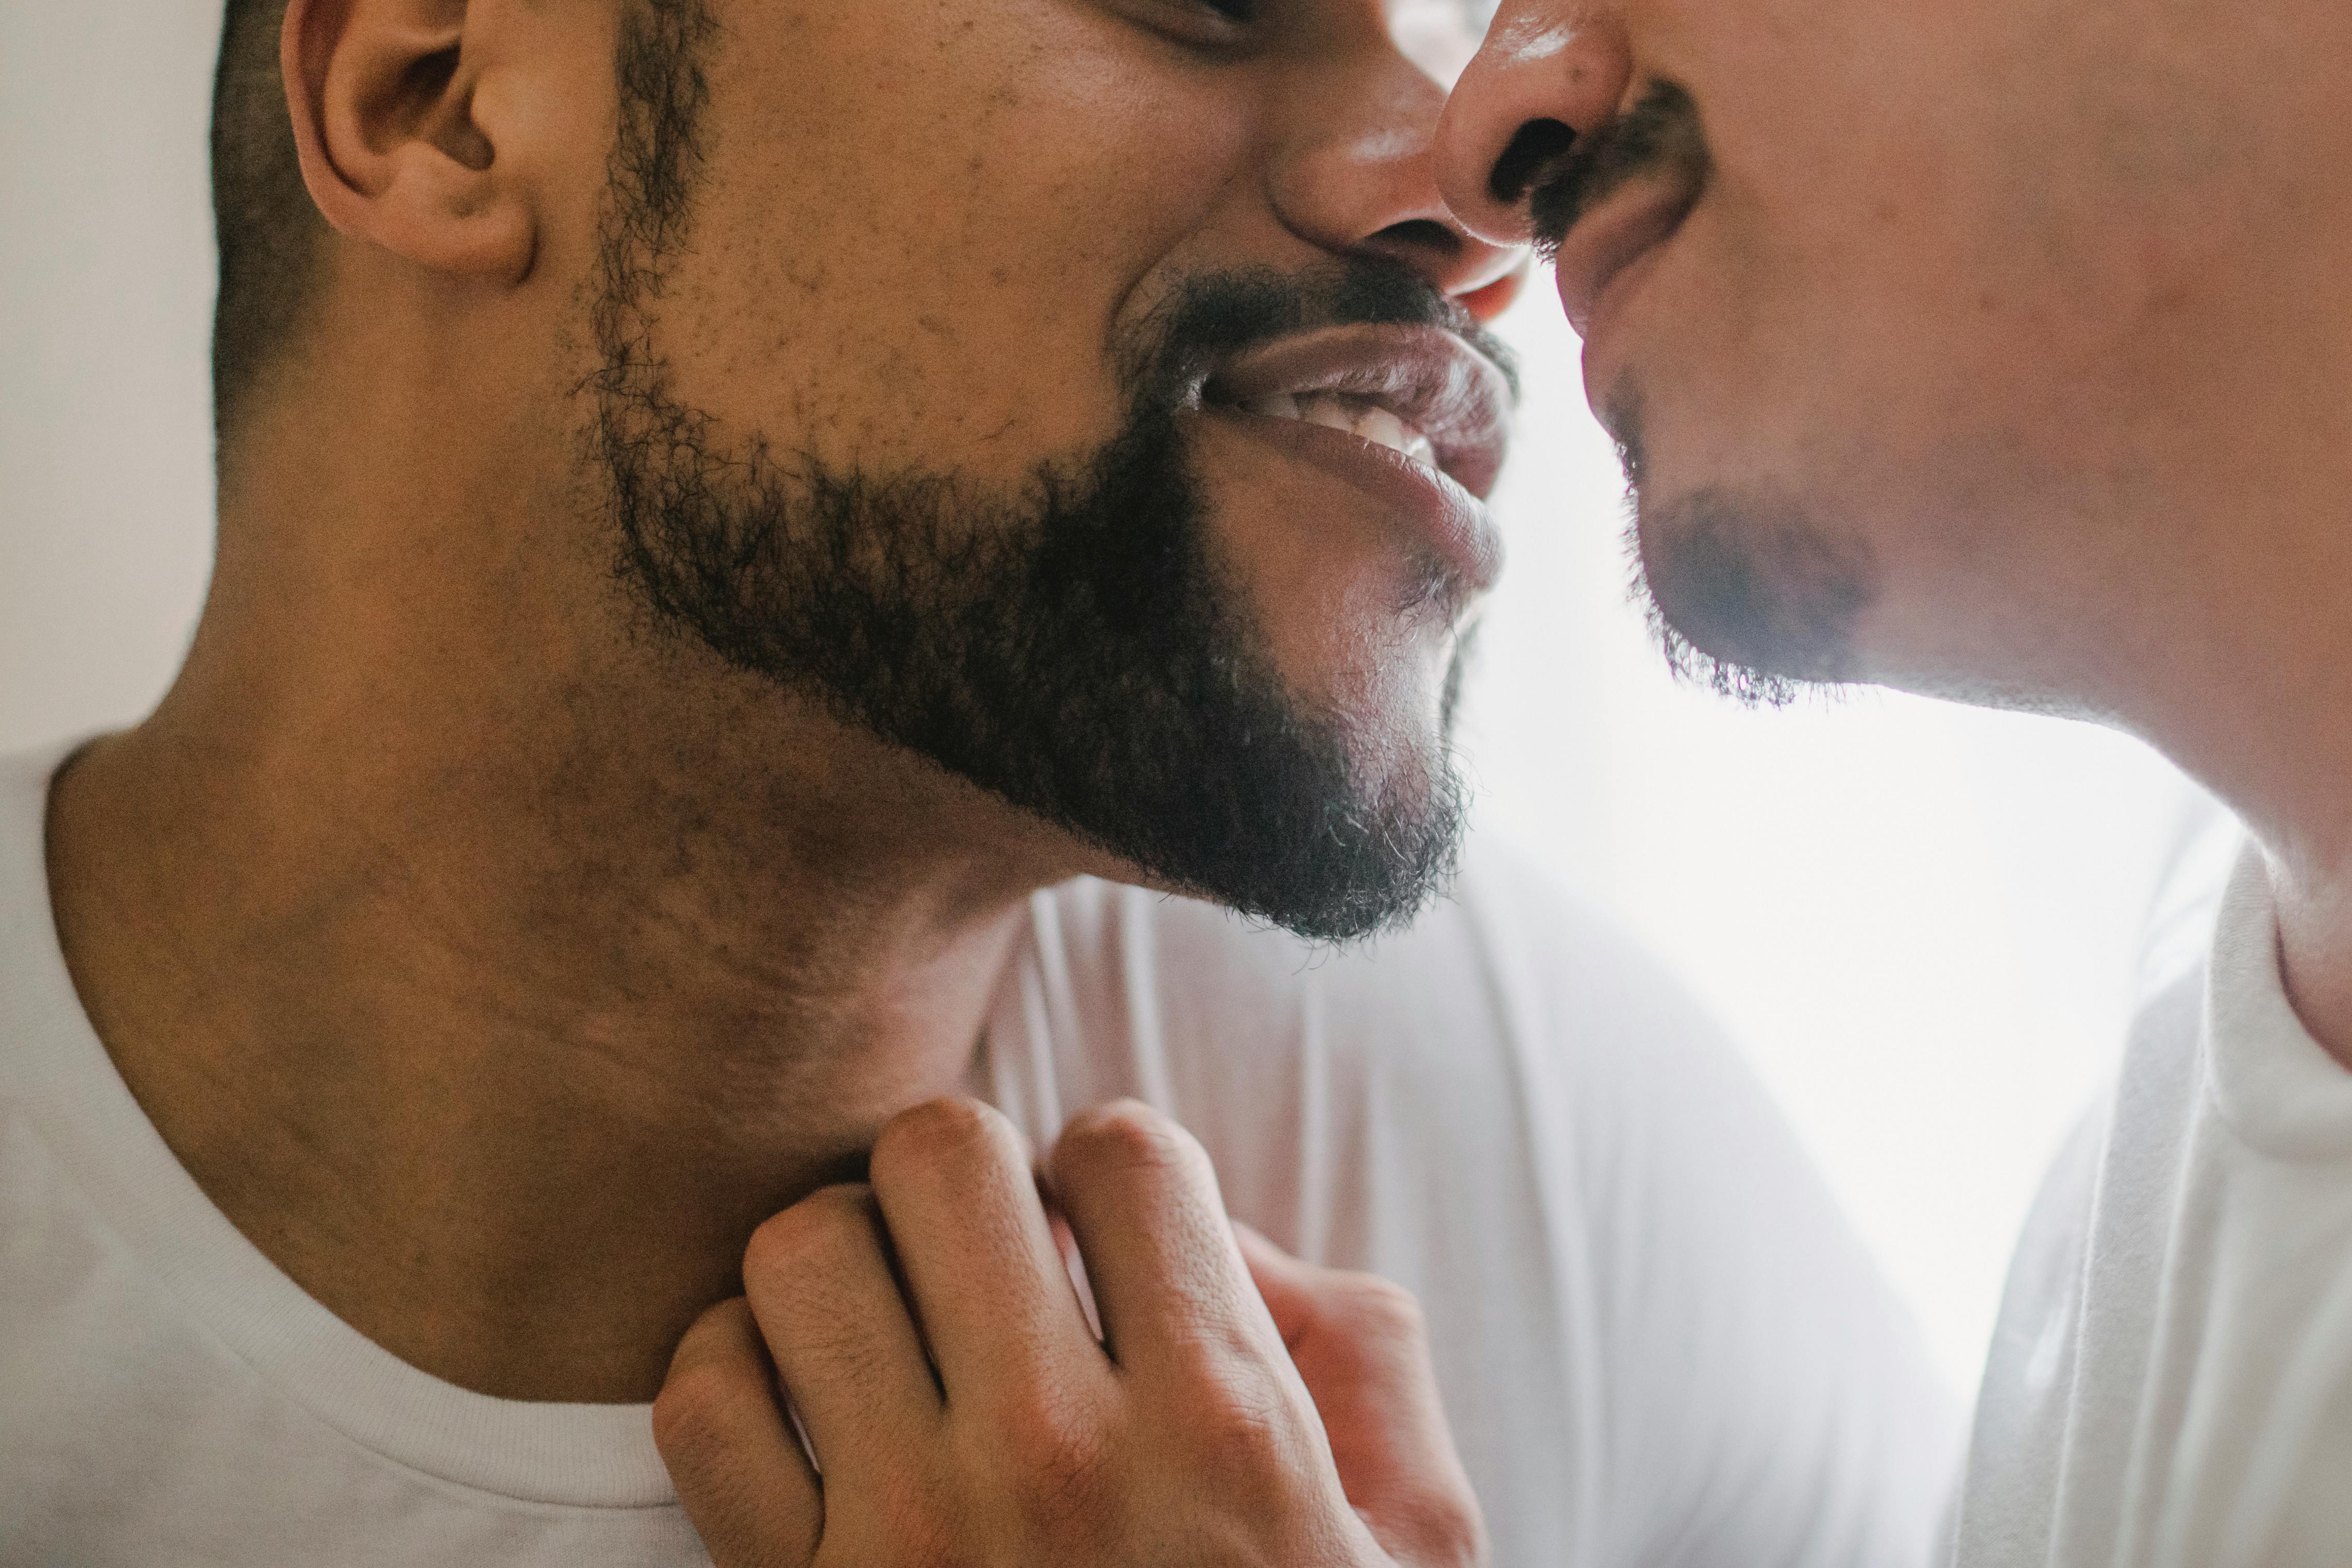 Two men pictured while about to kiss | Source: Pexels